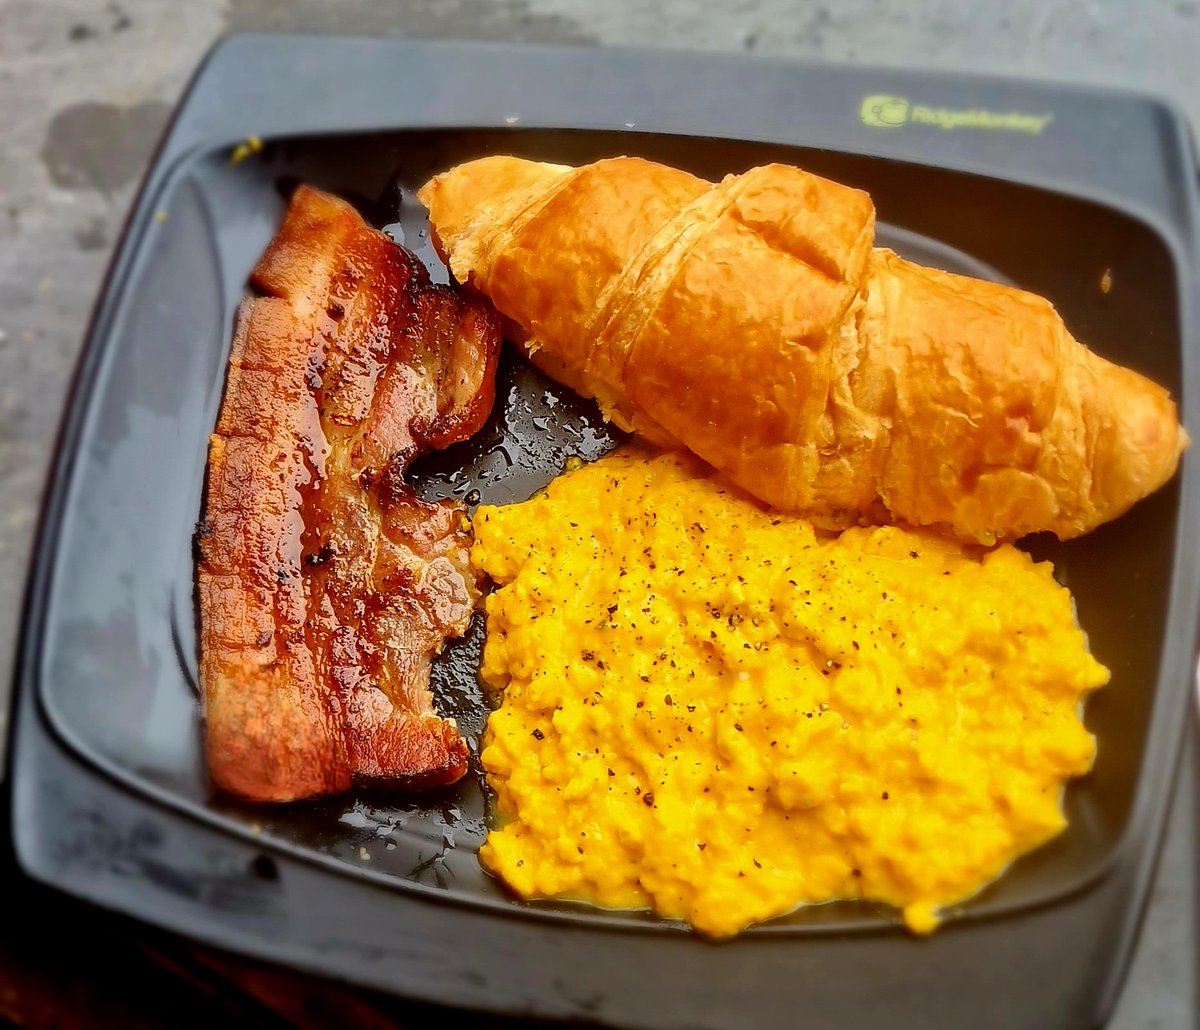 Bacon and eggs Deano style. 4mm thick smoked bacon, freshly cut straight off the belly. Scrambled eggs made with golden yolkers, double cream, and an obscene chunk of butter. Freshly made Croissant. 😎 🐷🐔🥐